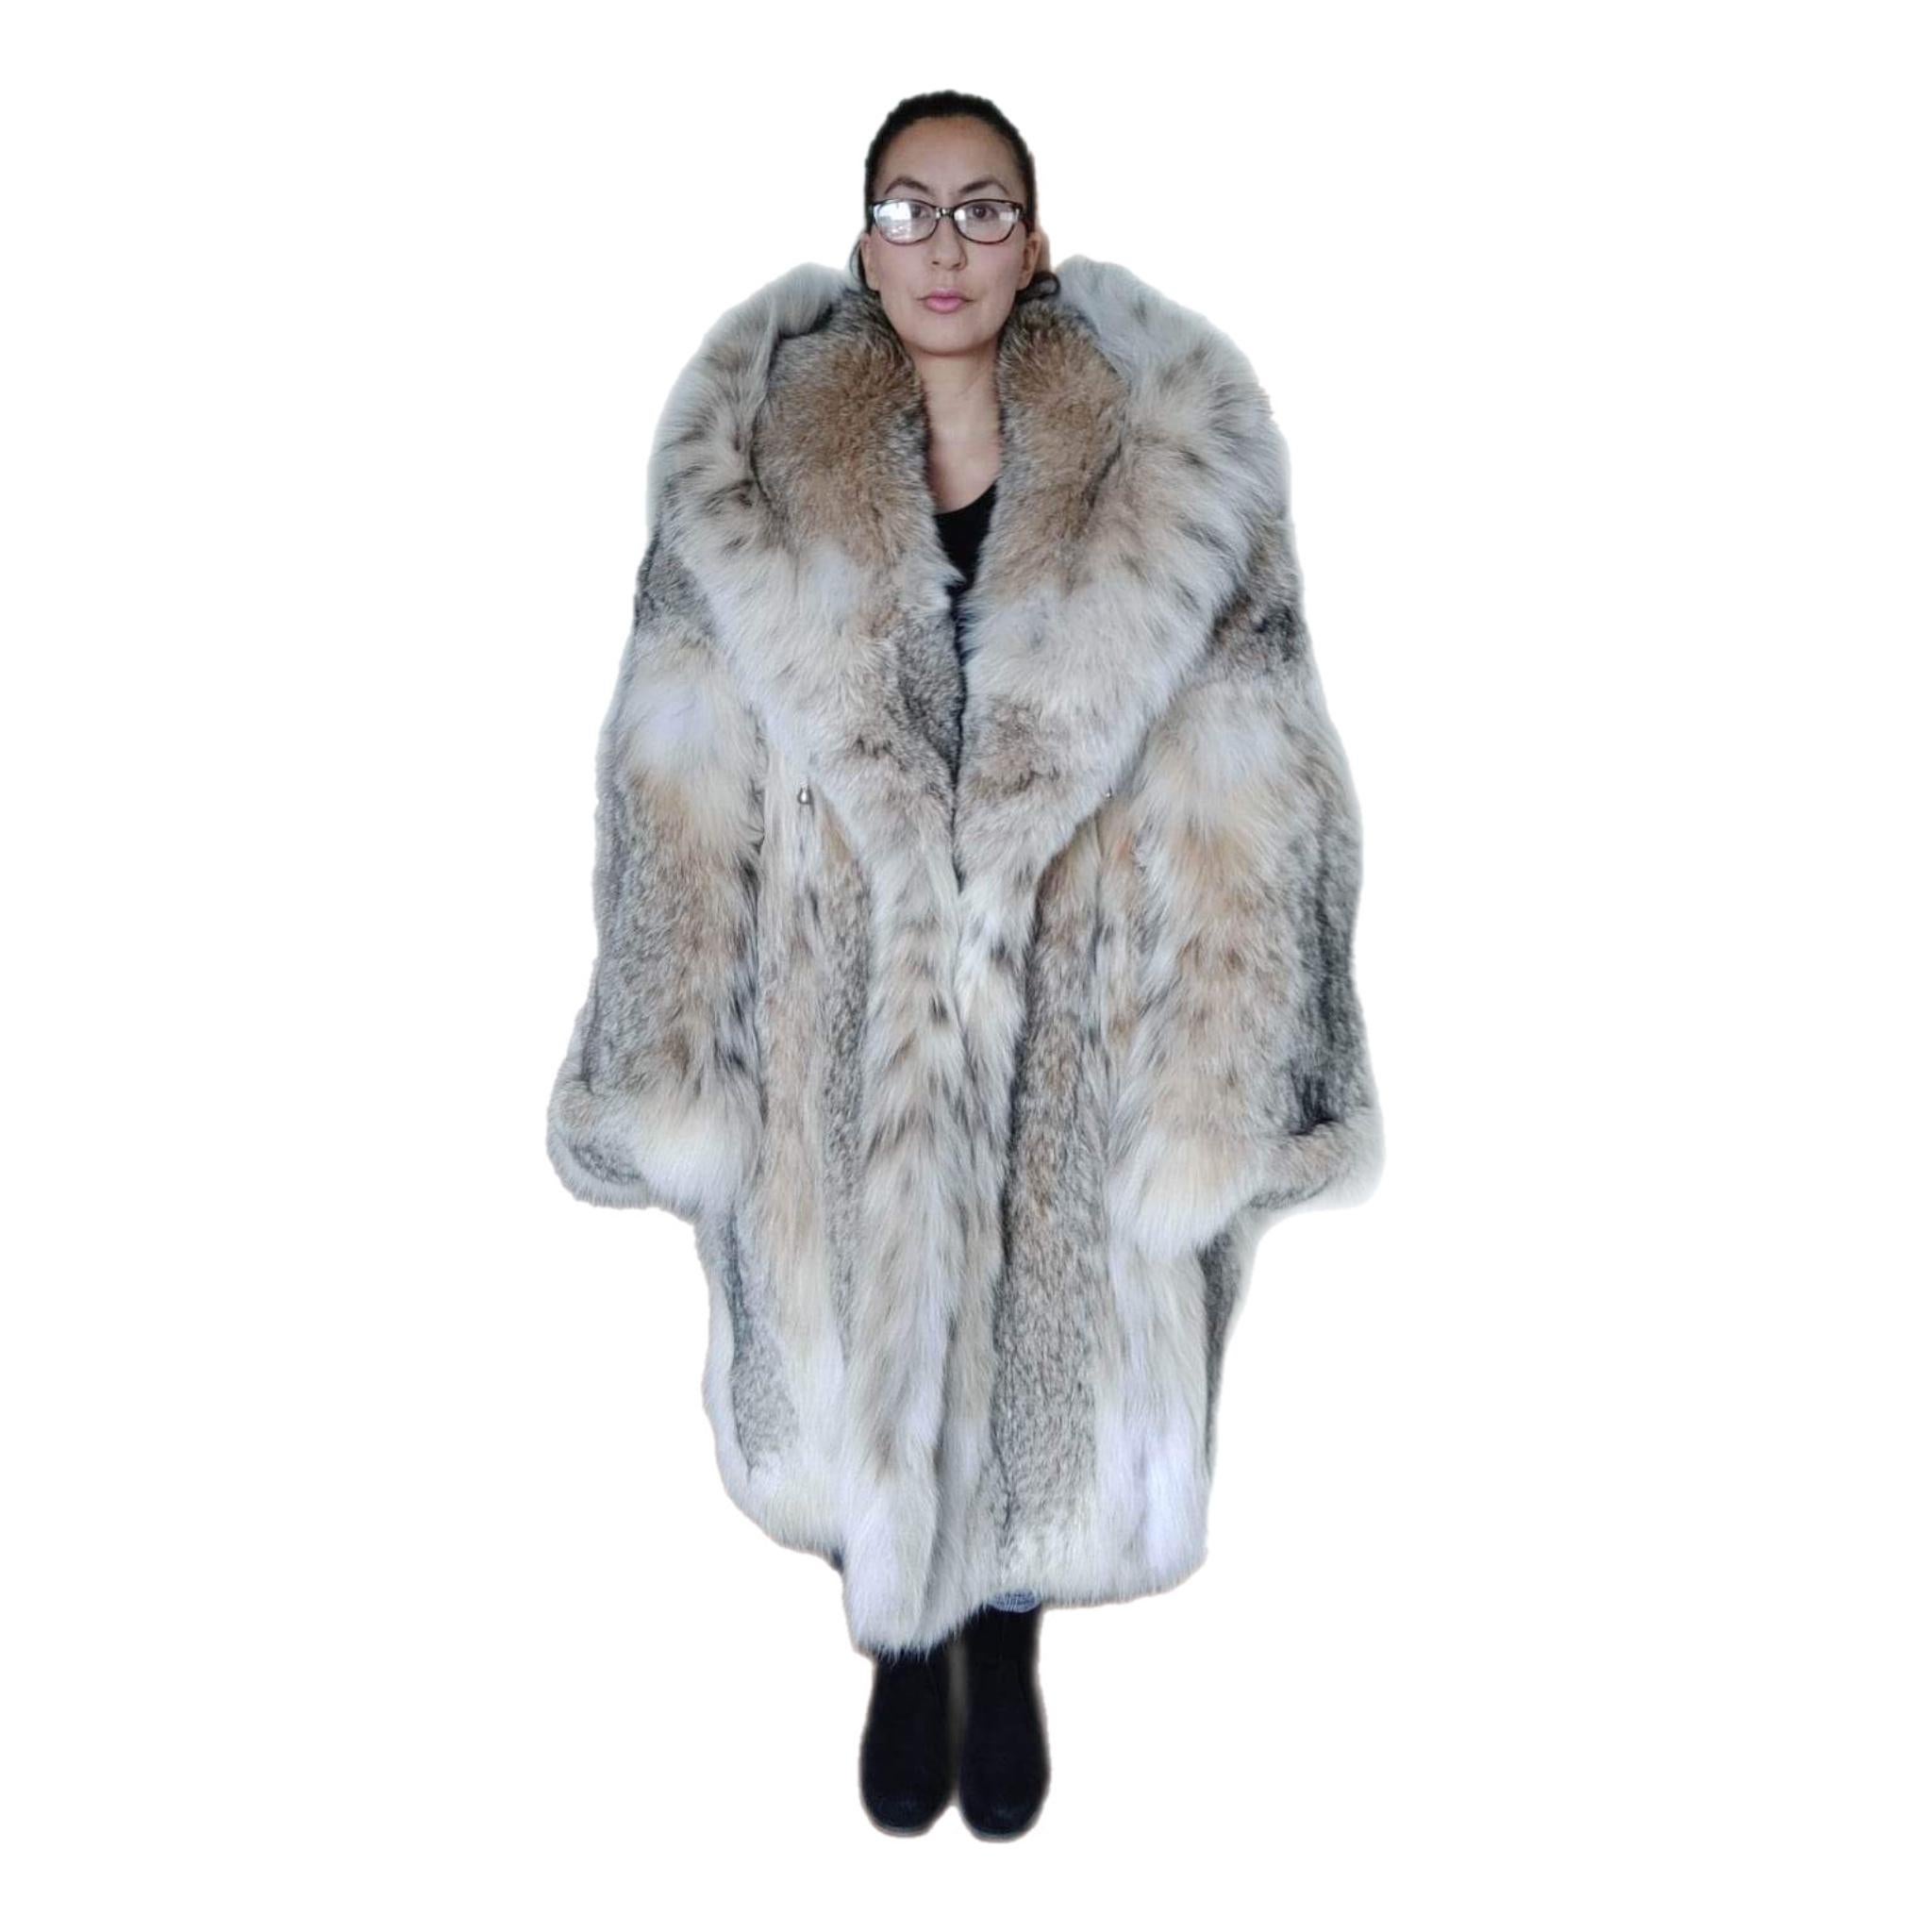 Women's Brand new lightweight Canadian lynx fur coat with detachable hood size 24 XXL For Sale